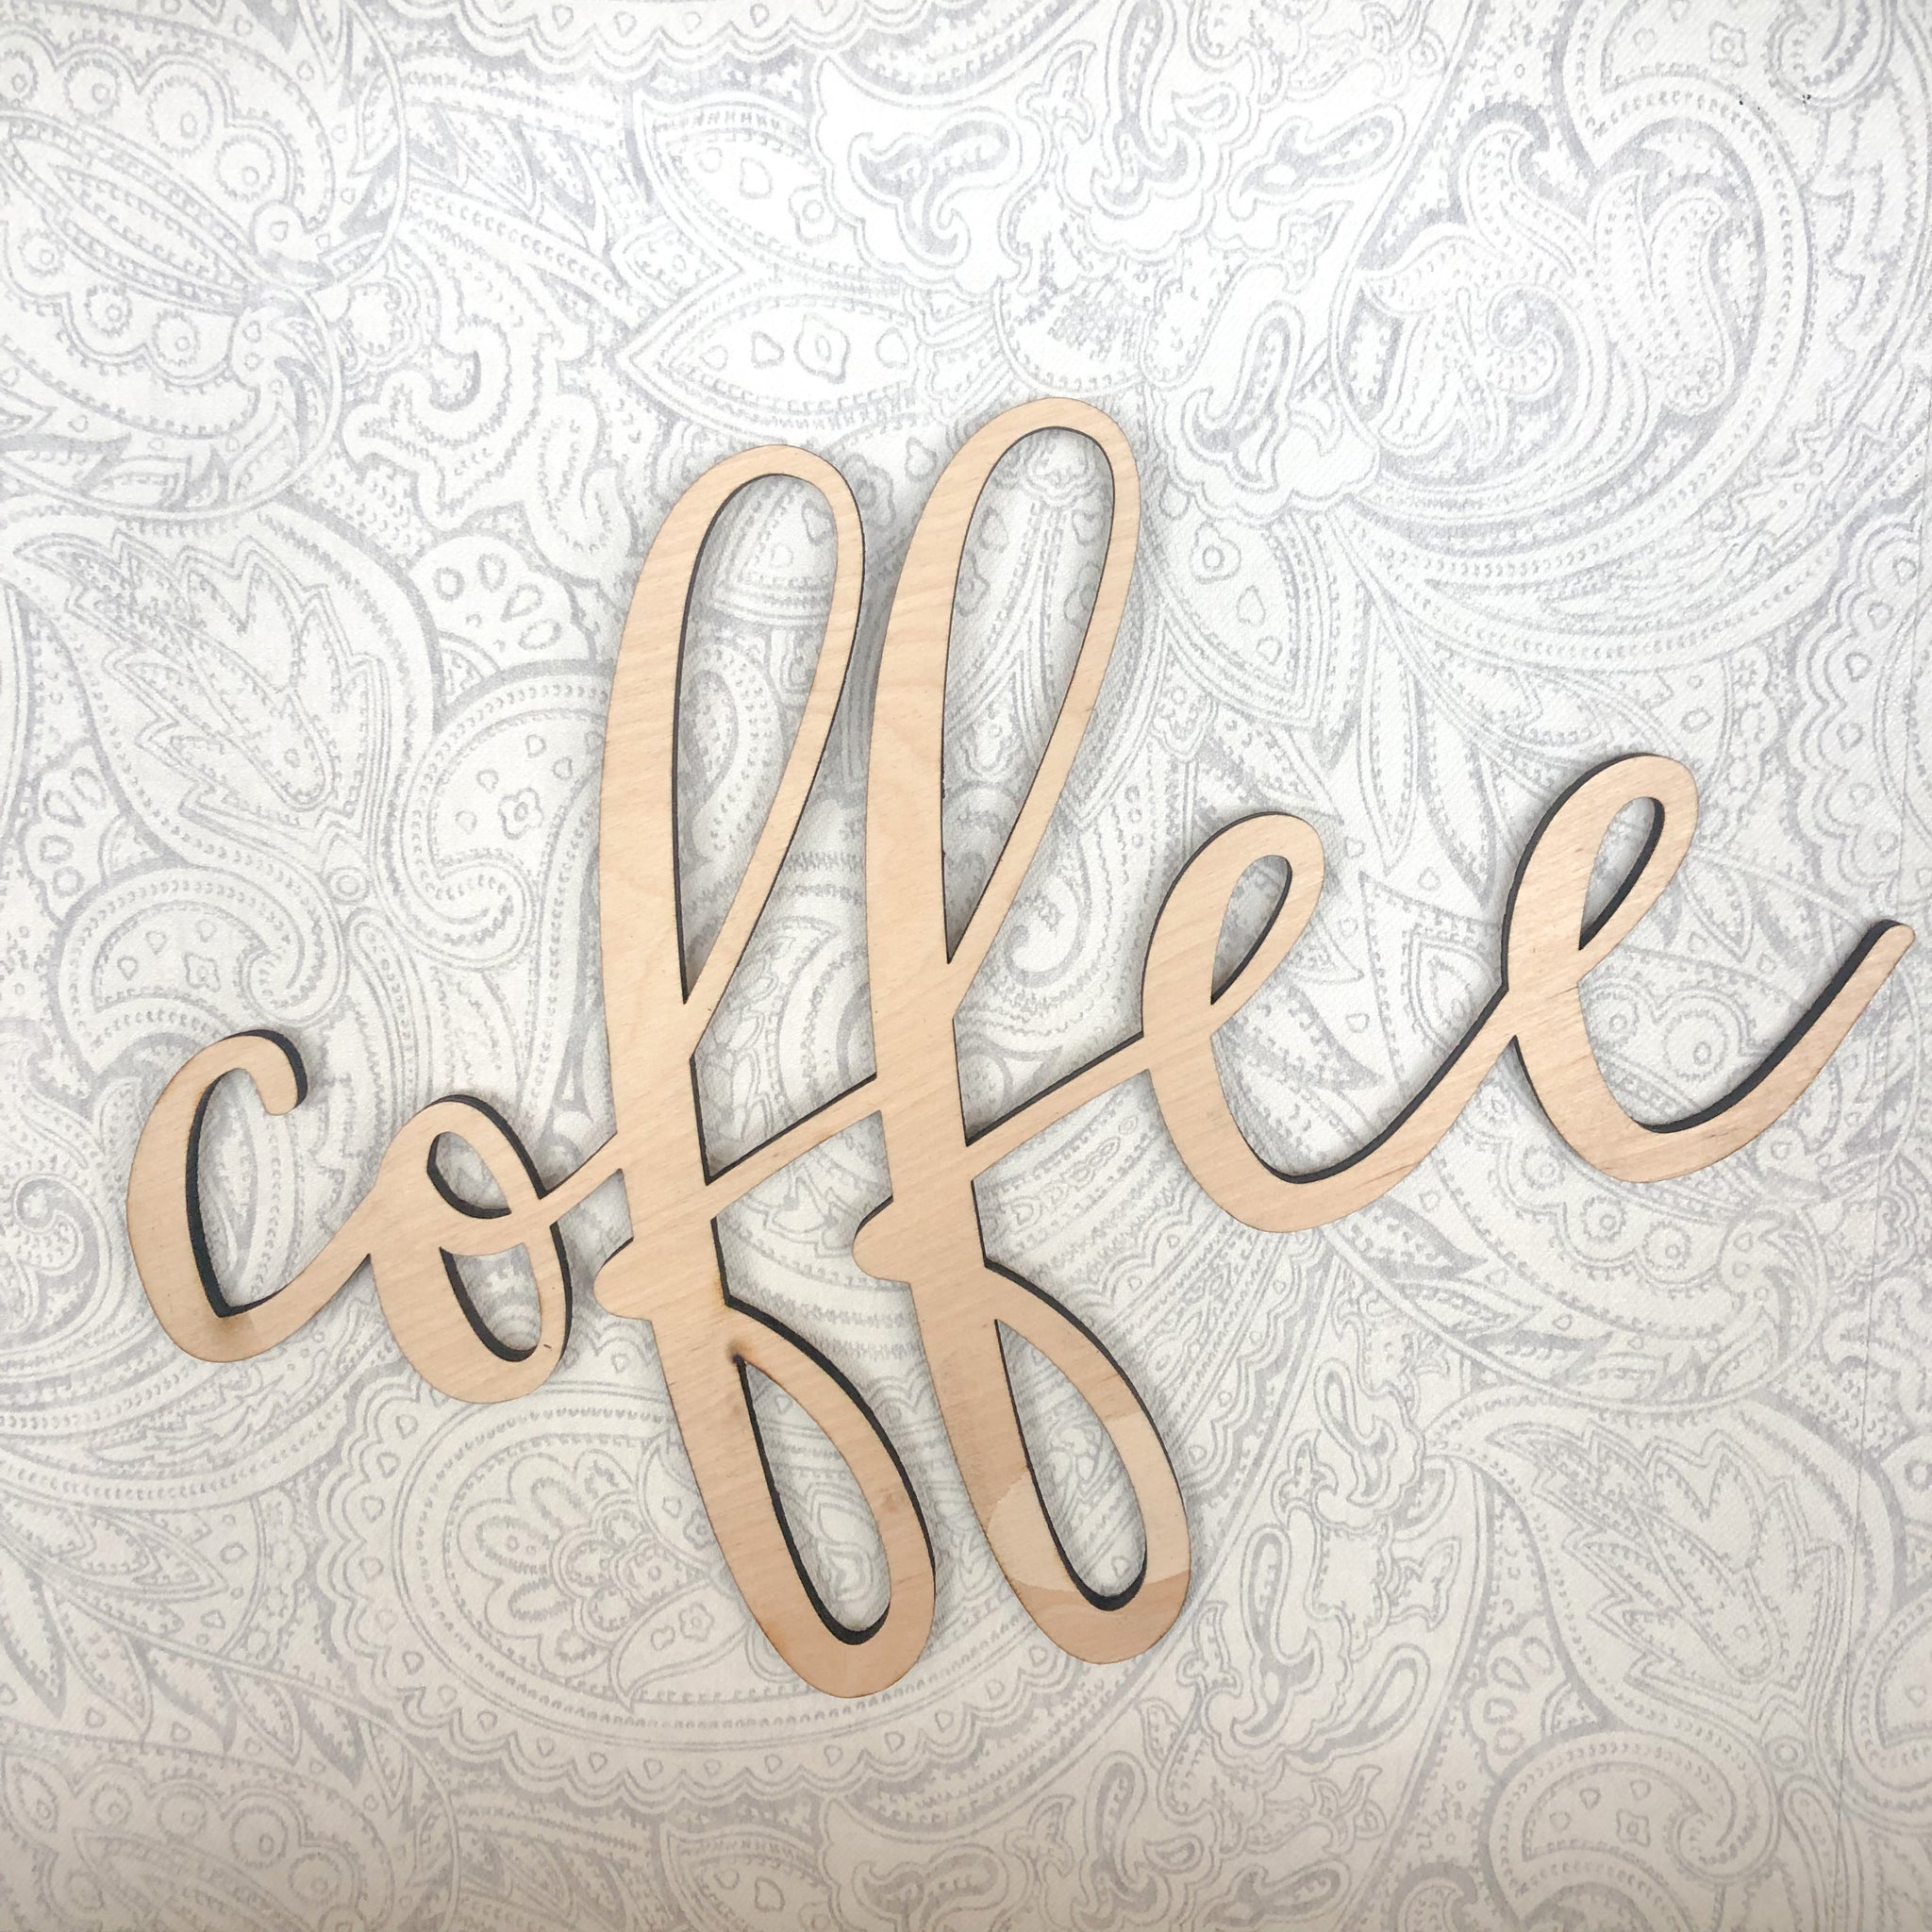 Coffee wooden cut out